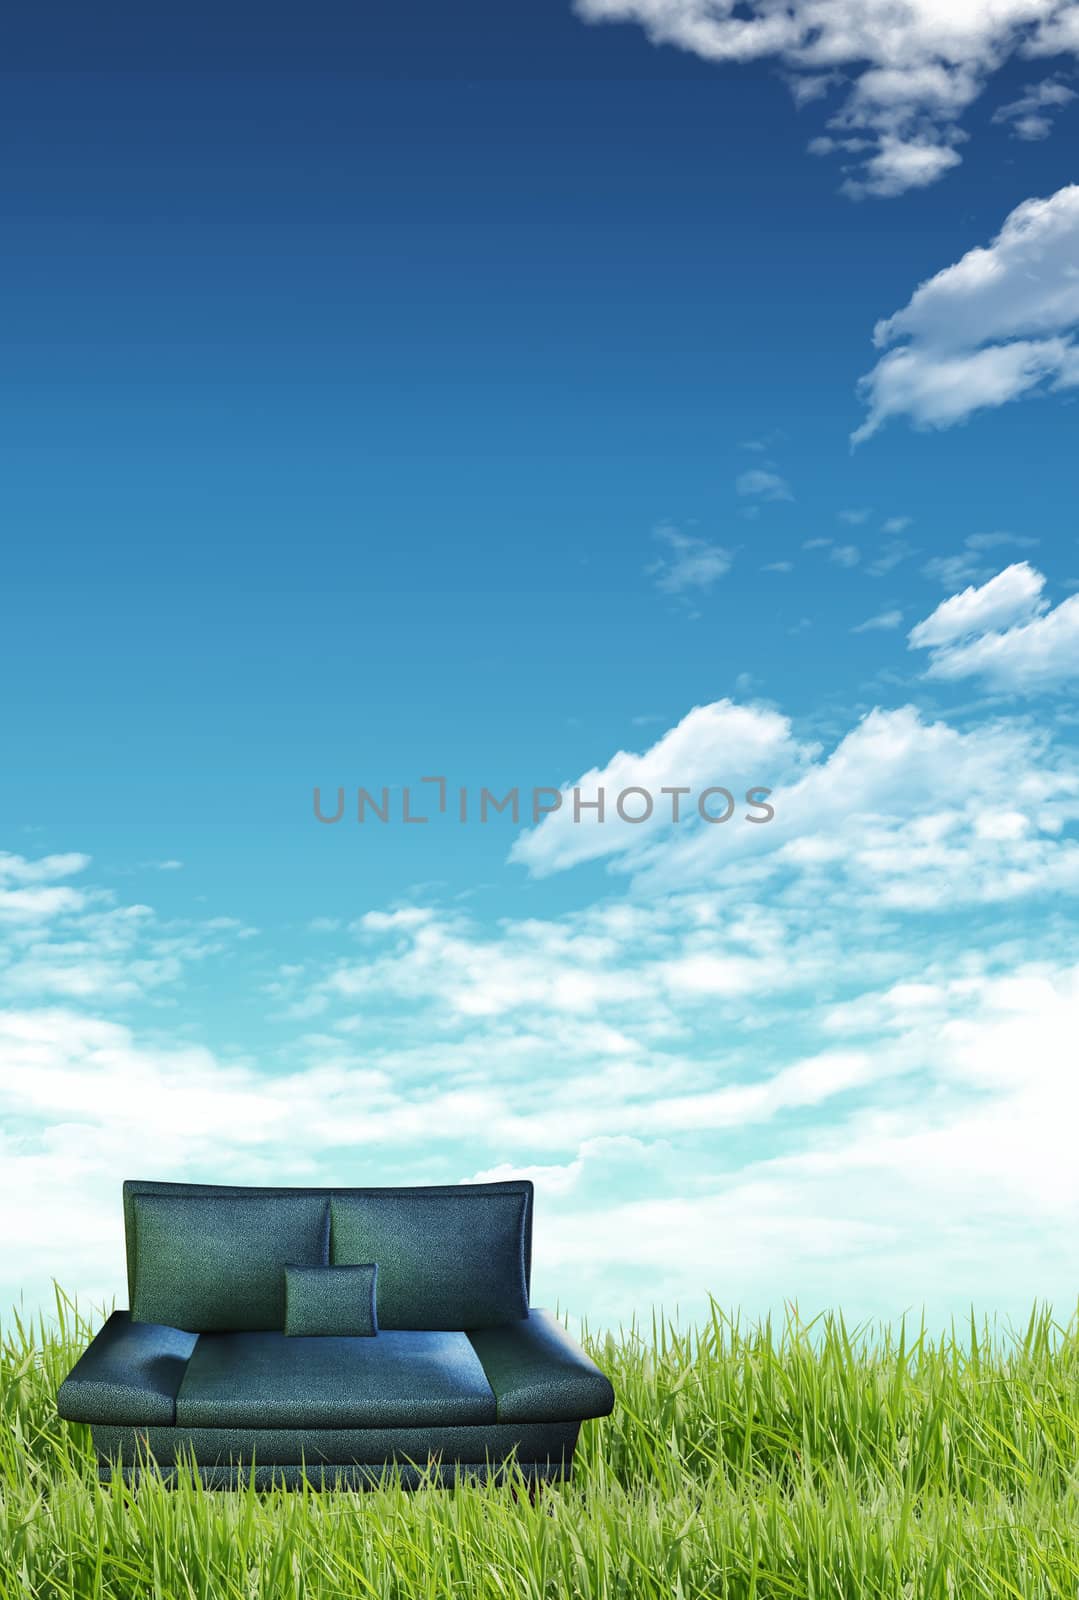 Green grass, blue sky and a sofa by rufous